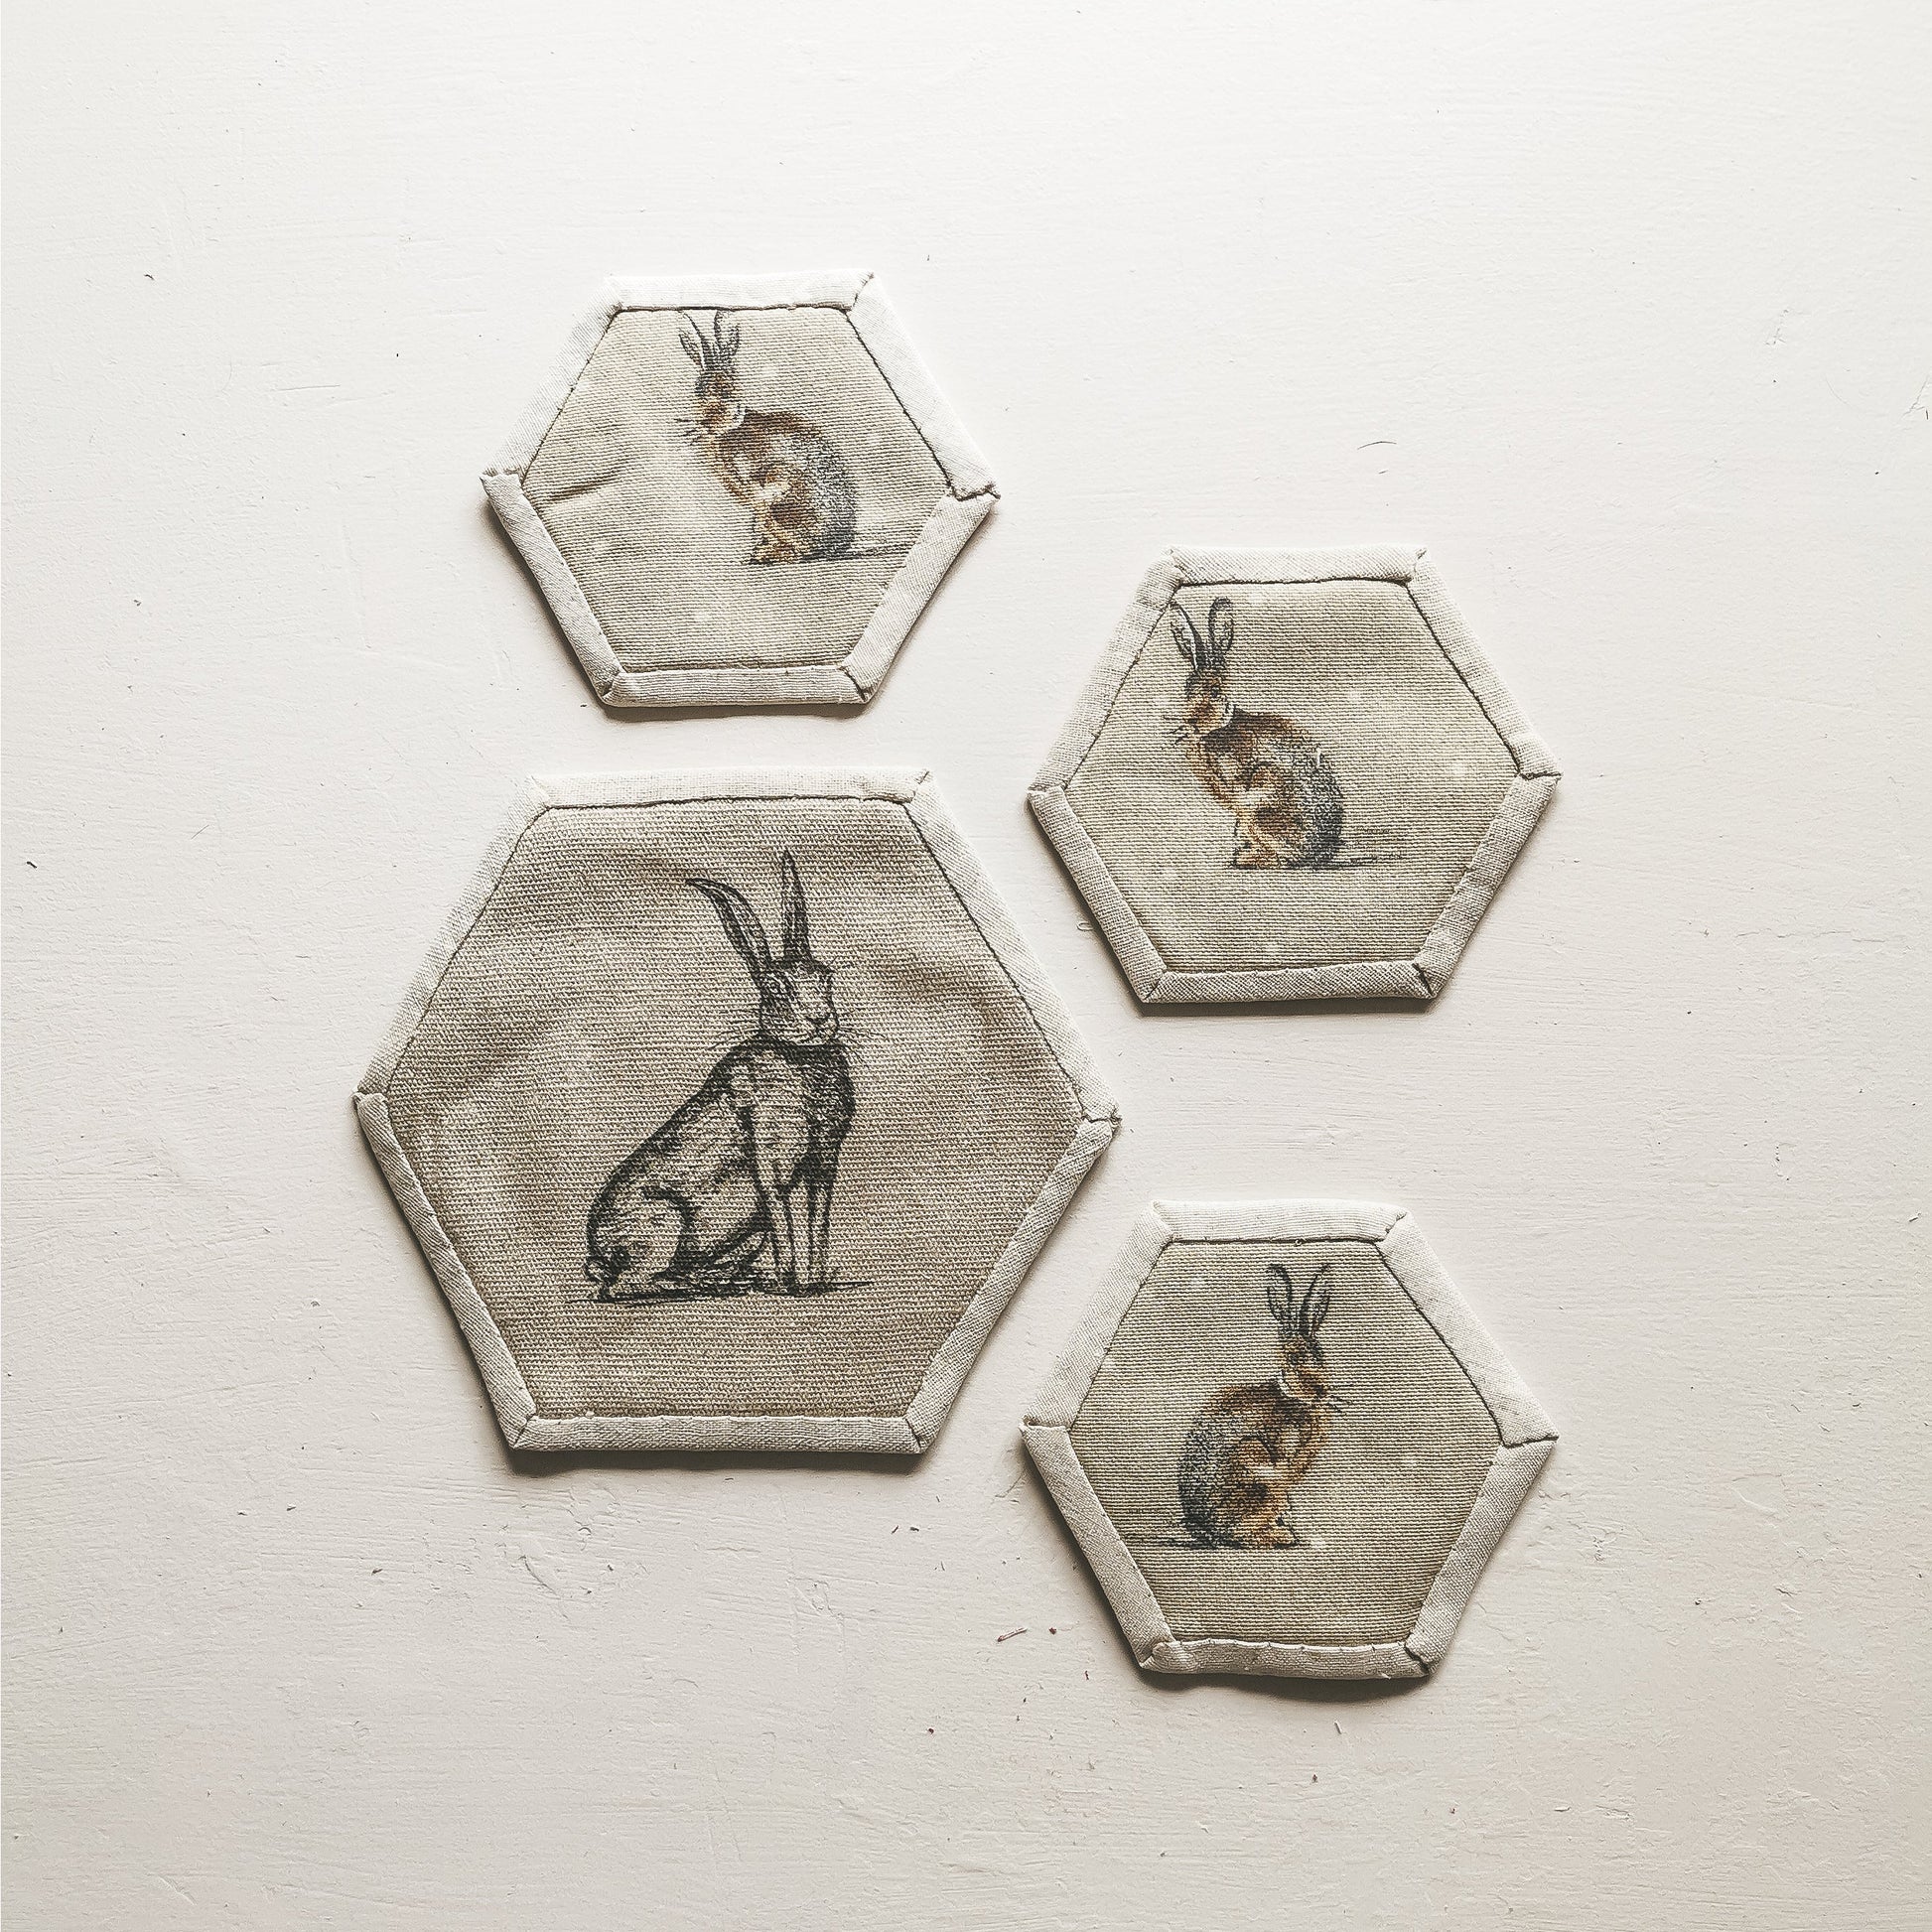 Hare Print Coasters handmade by F&B - saving waste and looking cute in your home